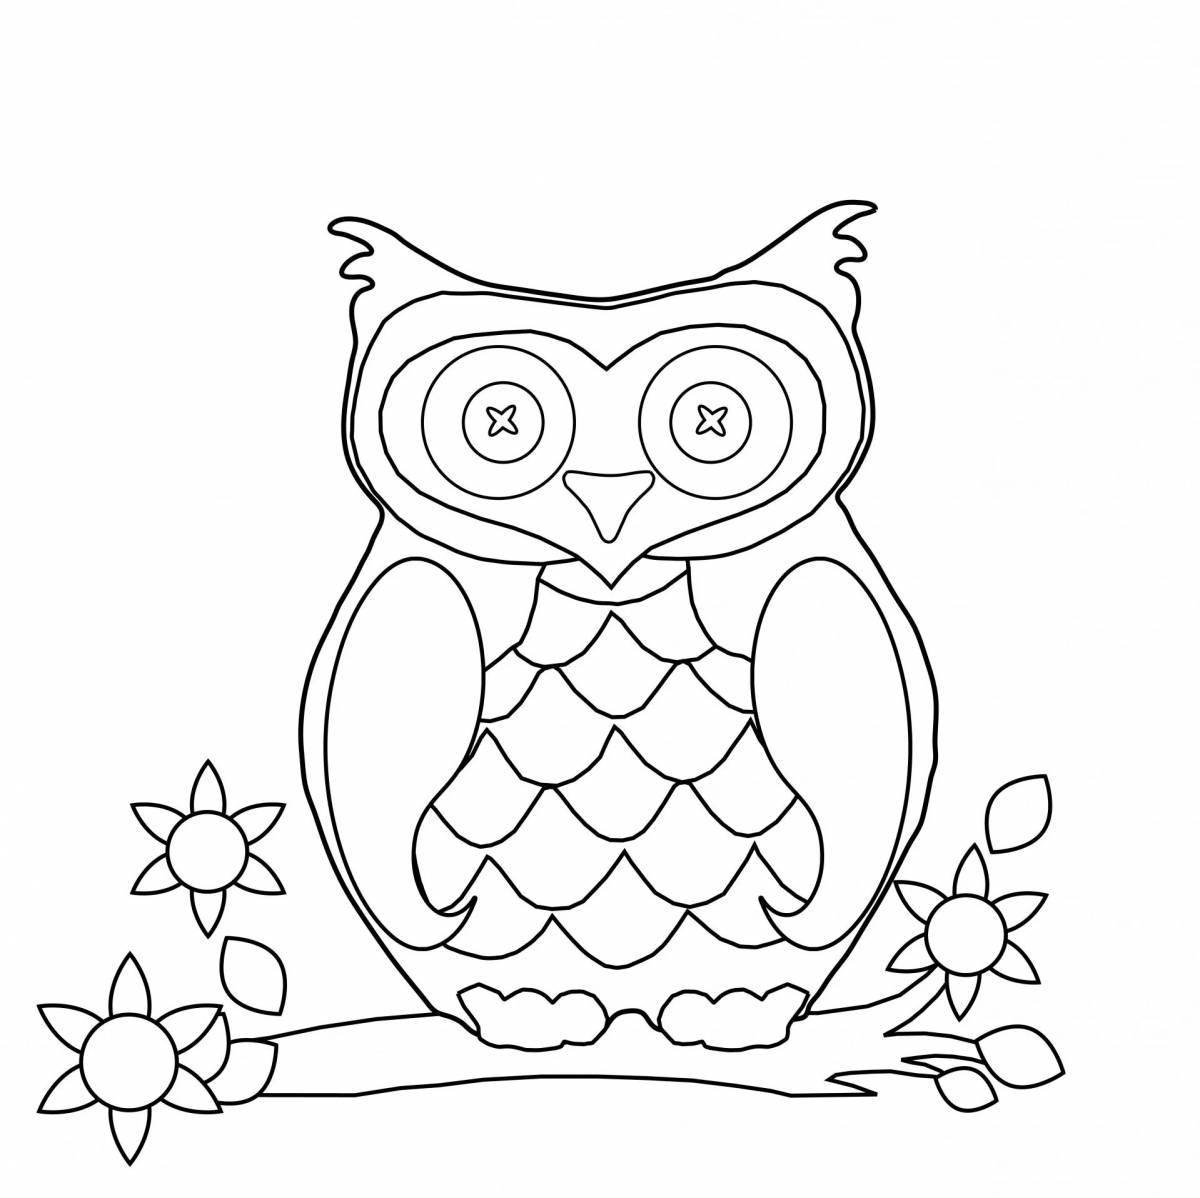 Joyful anti-stress coloring book for children 4-5 years old